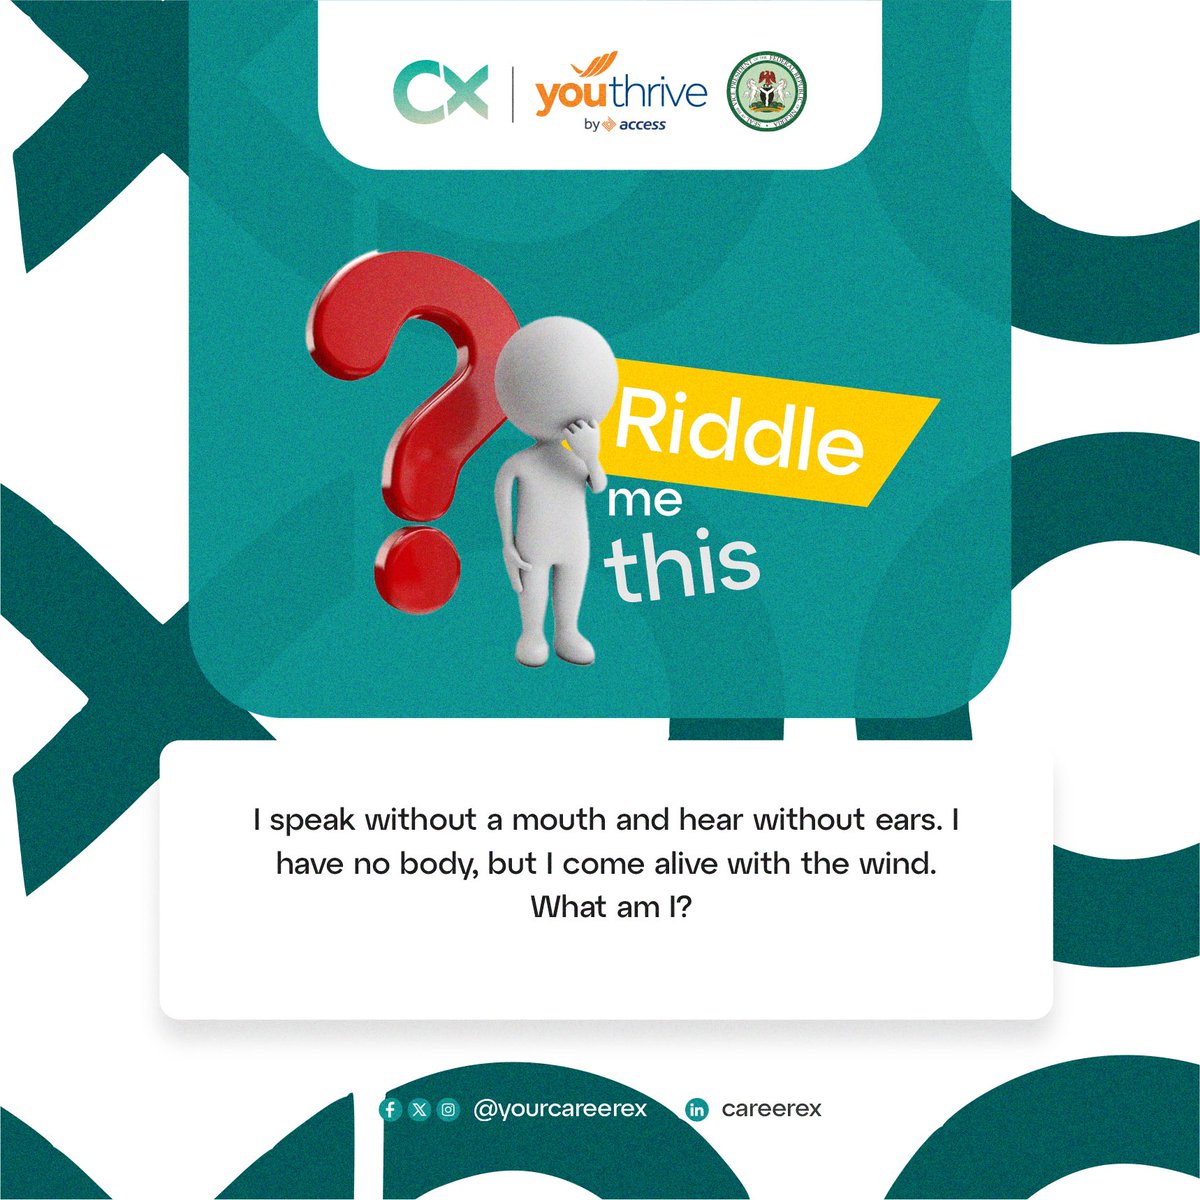 Can you get the answer right? Comment your guesses in the comment section as many as possible.

#RIDDLE #accessbank #youthrive #careerexinternship #elitepath #tech #yourcareerex #techblogger #coding #programmer #productmanager